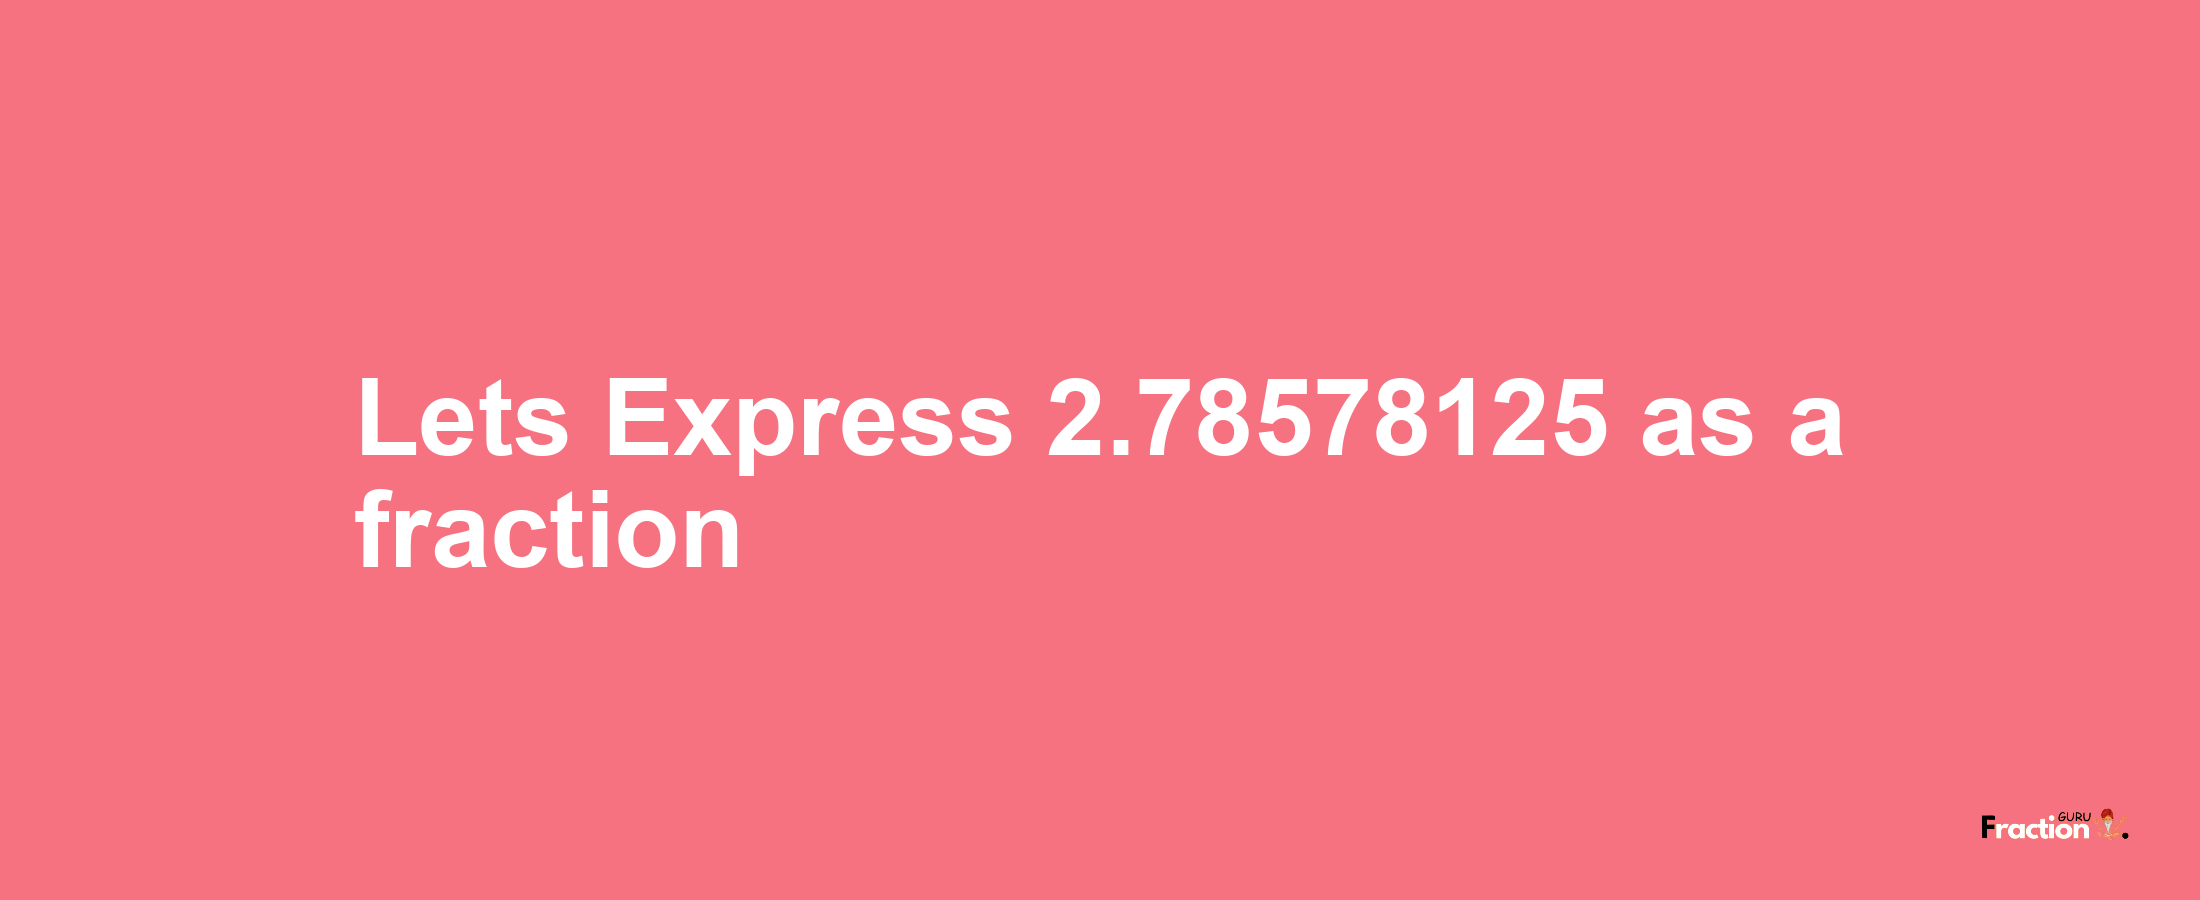 Lets Express 2.78578125 as afraction